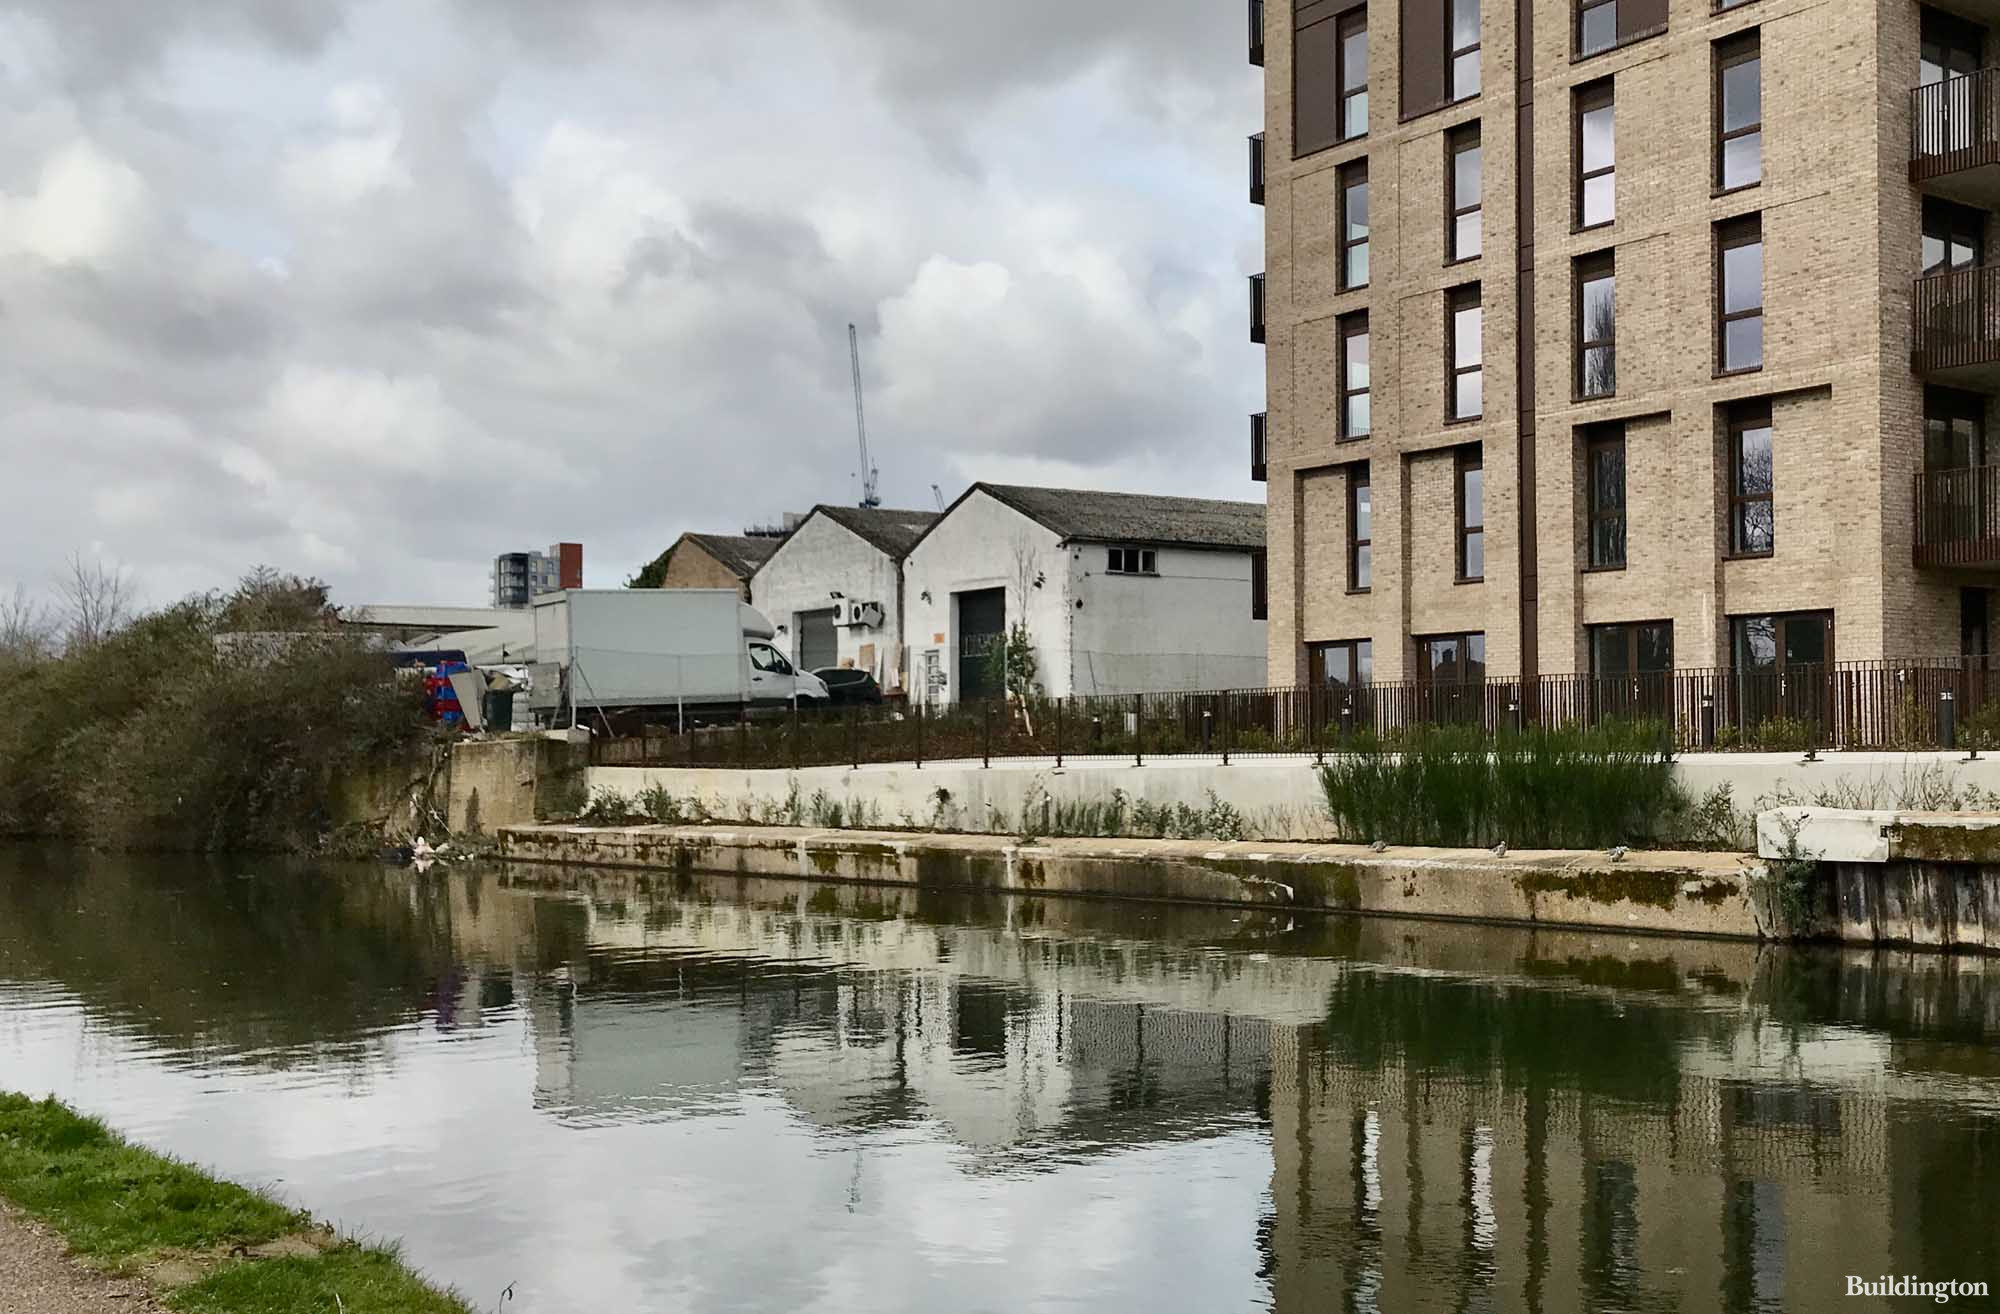 Abbey Manufacturing Estate sits on Grand Union Canal next to recently completed Liberty Wharf development in Alperton, Greater London HA0.